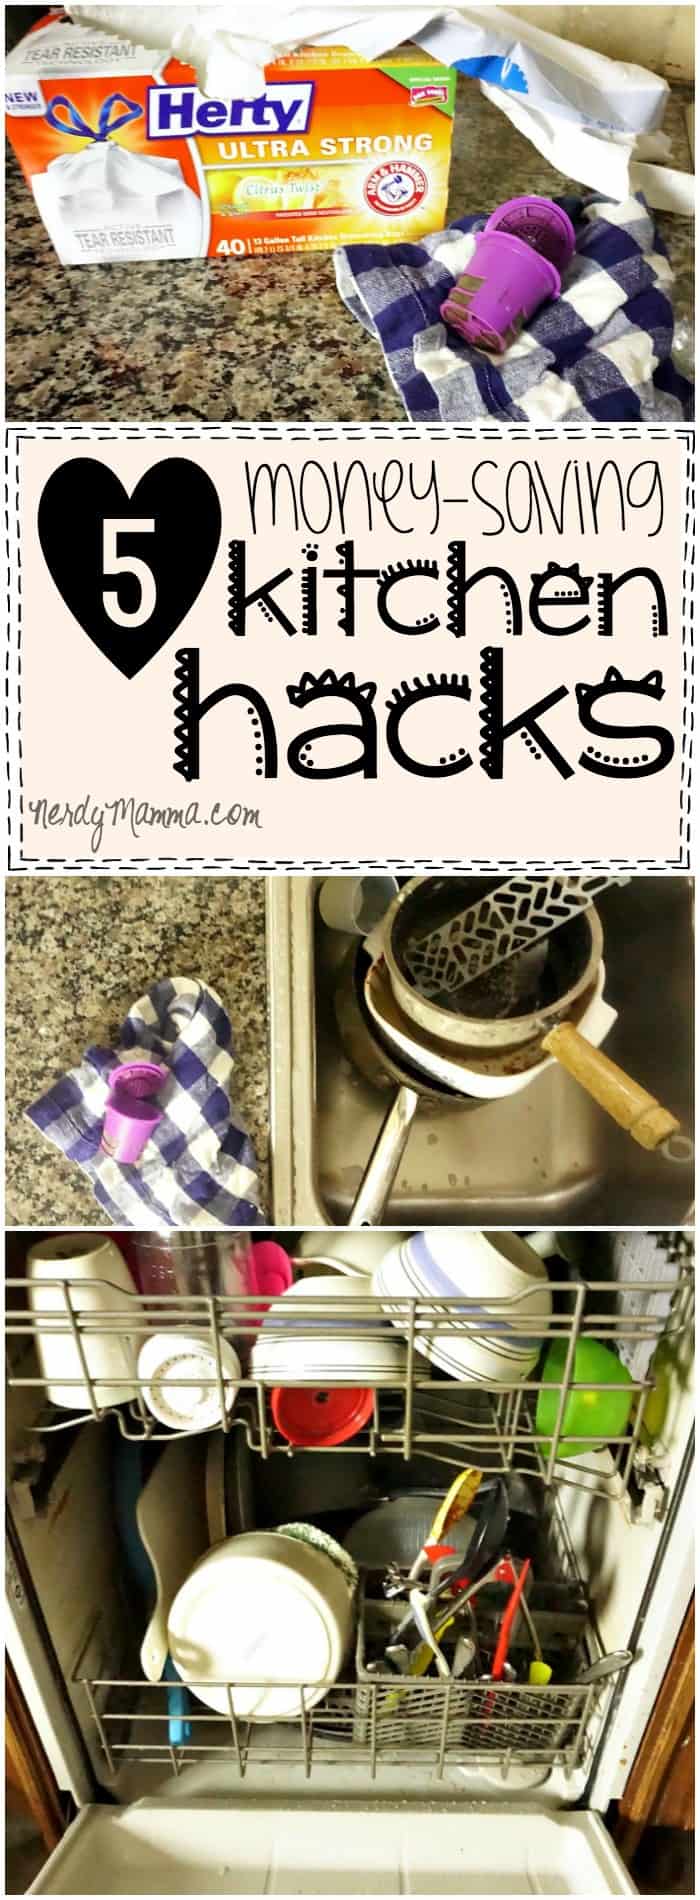 These 5 Money-Saving Kitchen Hacks are so simple. I love tricks and tips like this--especially when they can save me SO MUCH! LOL!